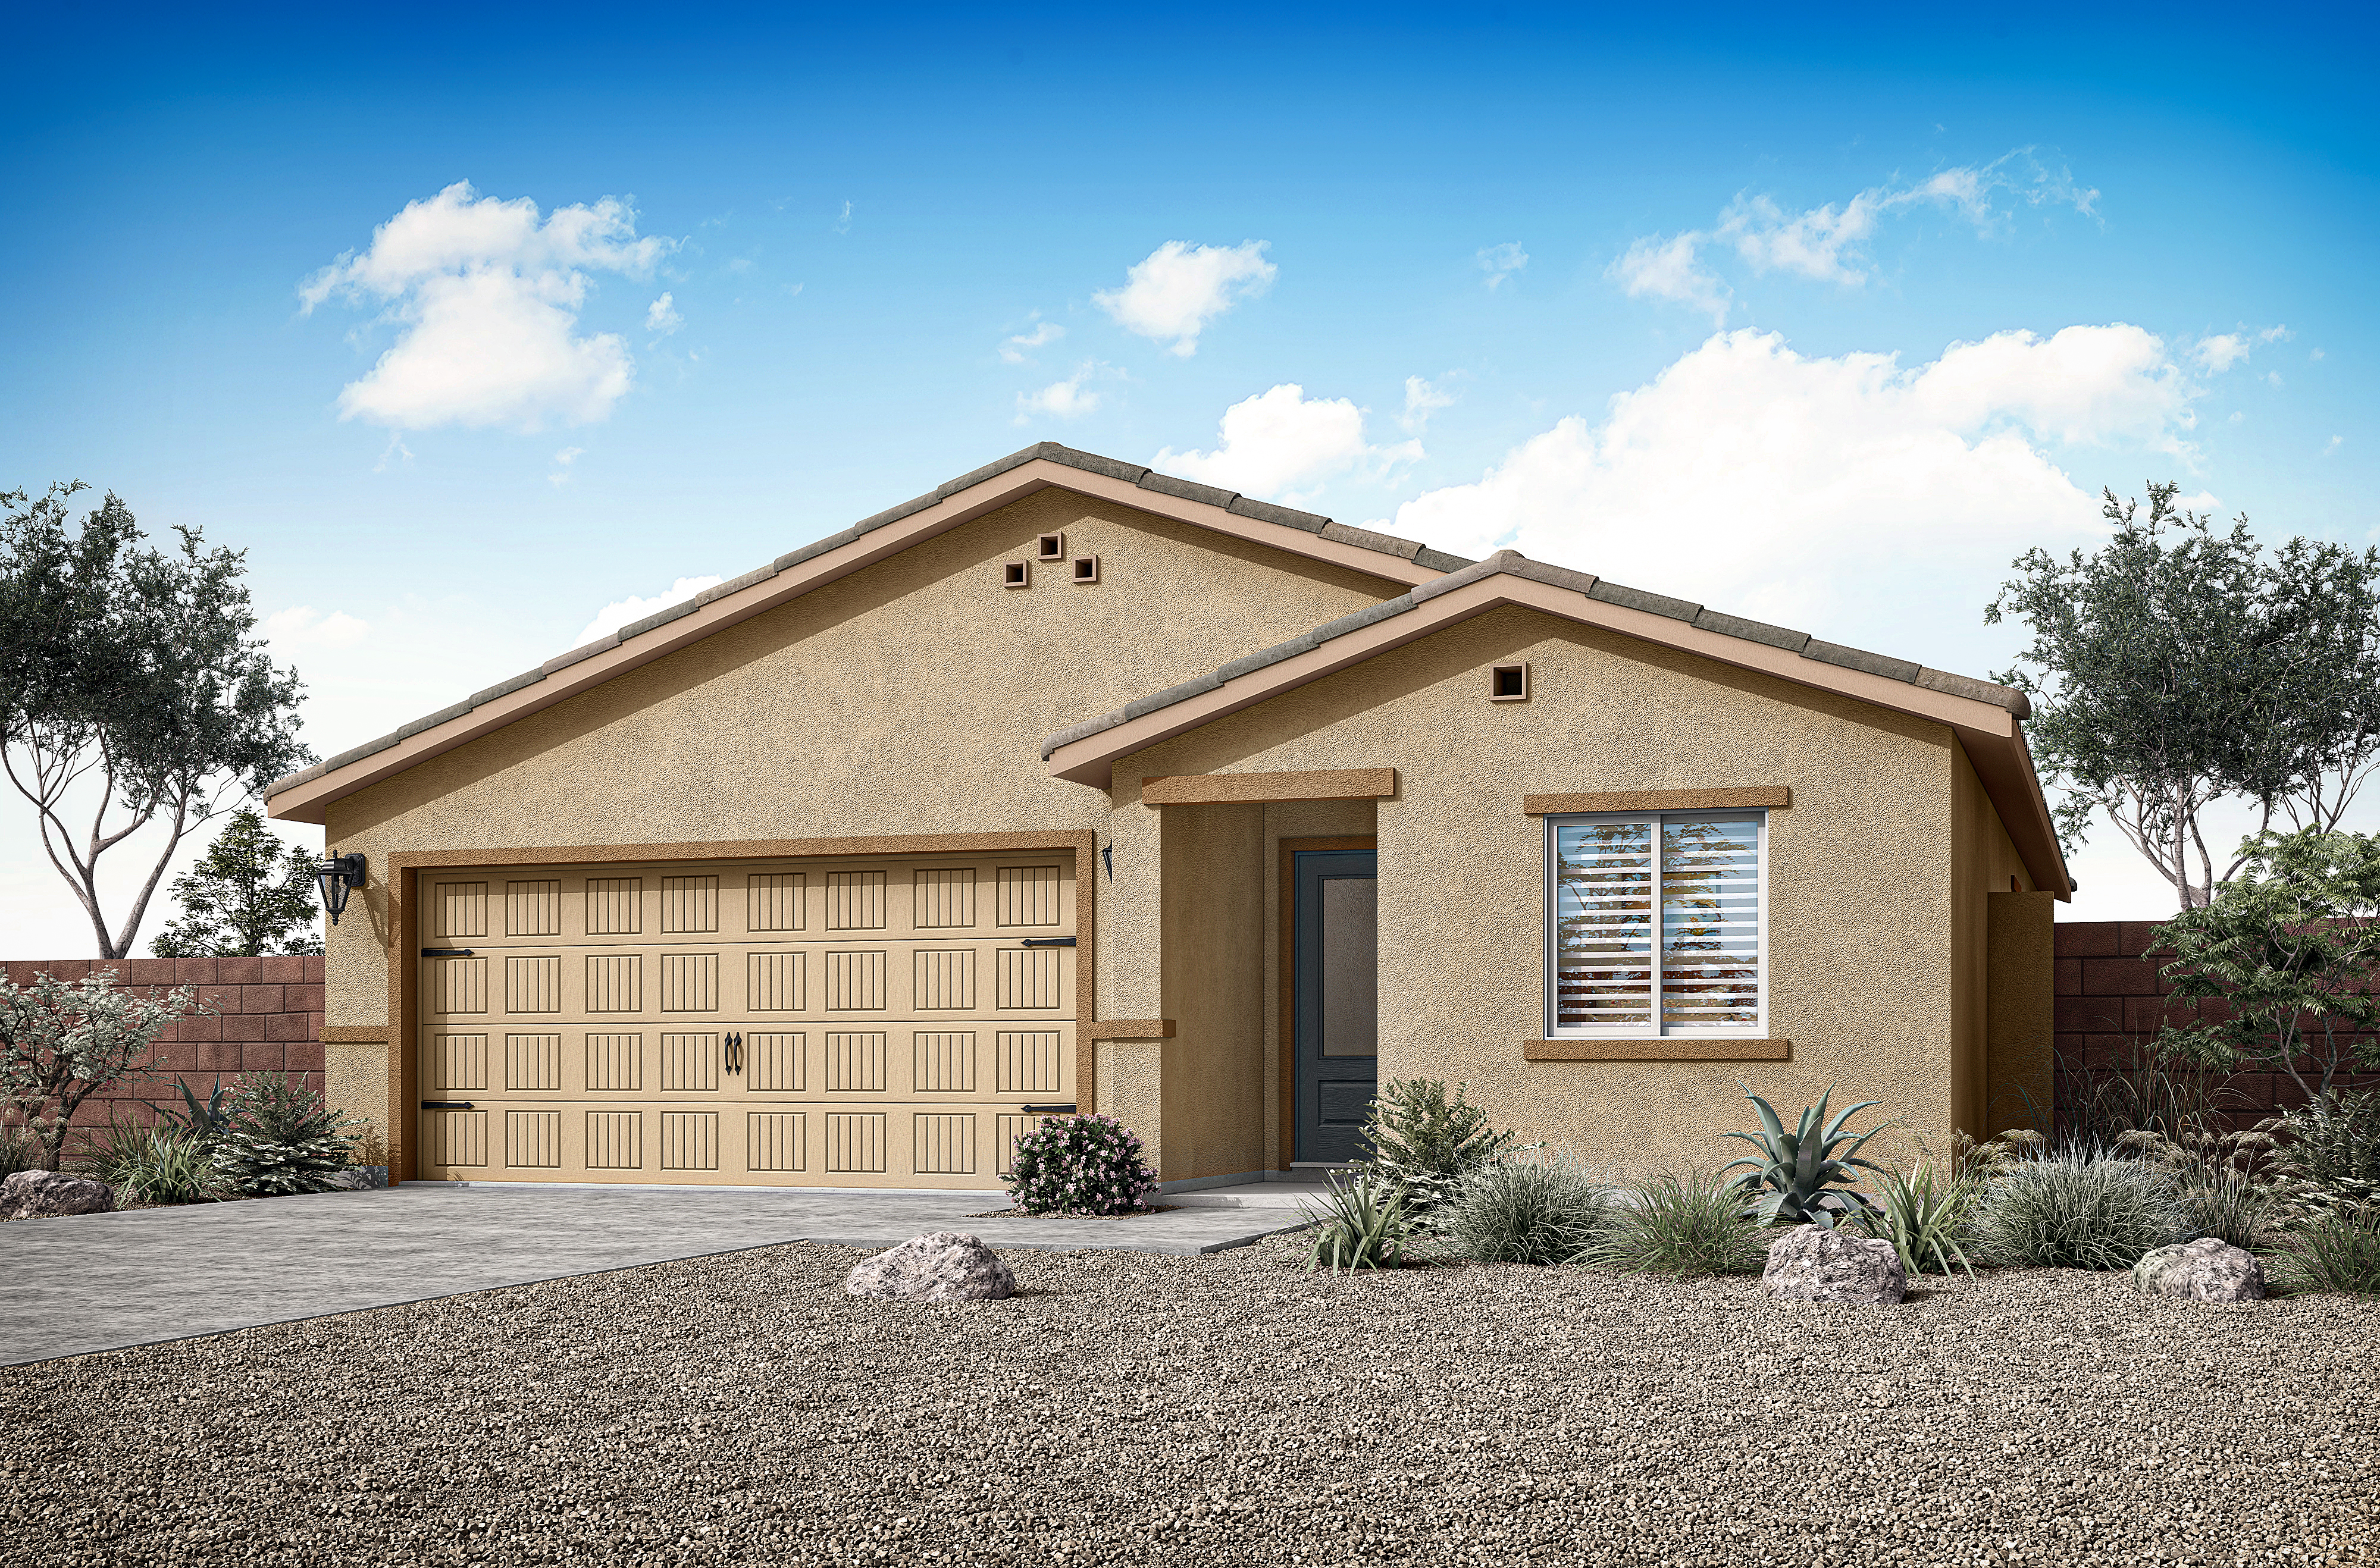 Artist rendering of the one-story Amado plan by LGI Homes with a stucco exterior and spacious two-car garage.